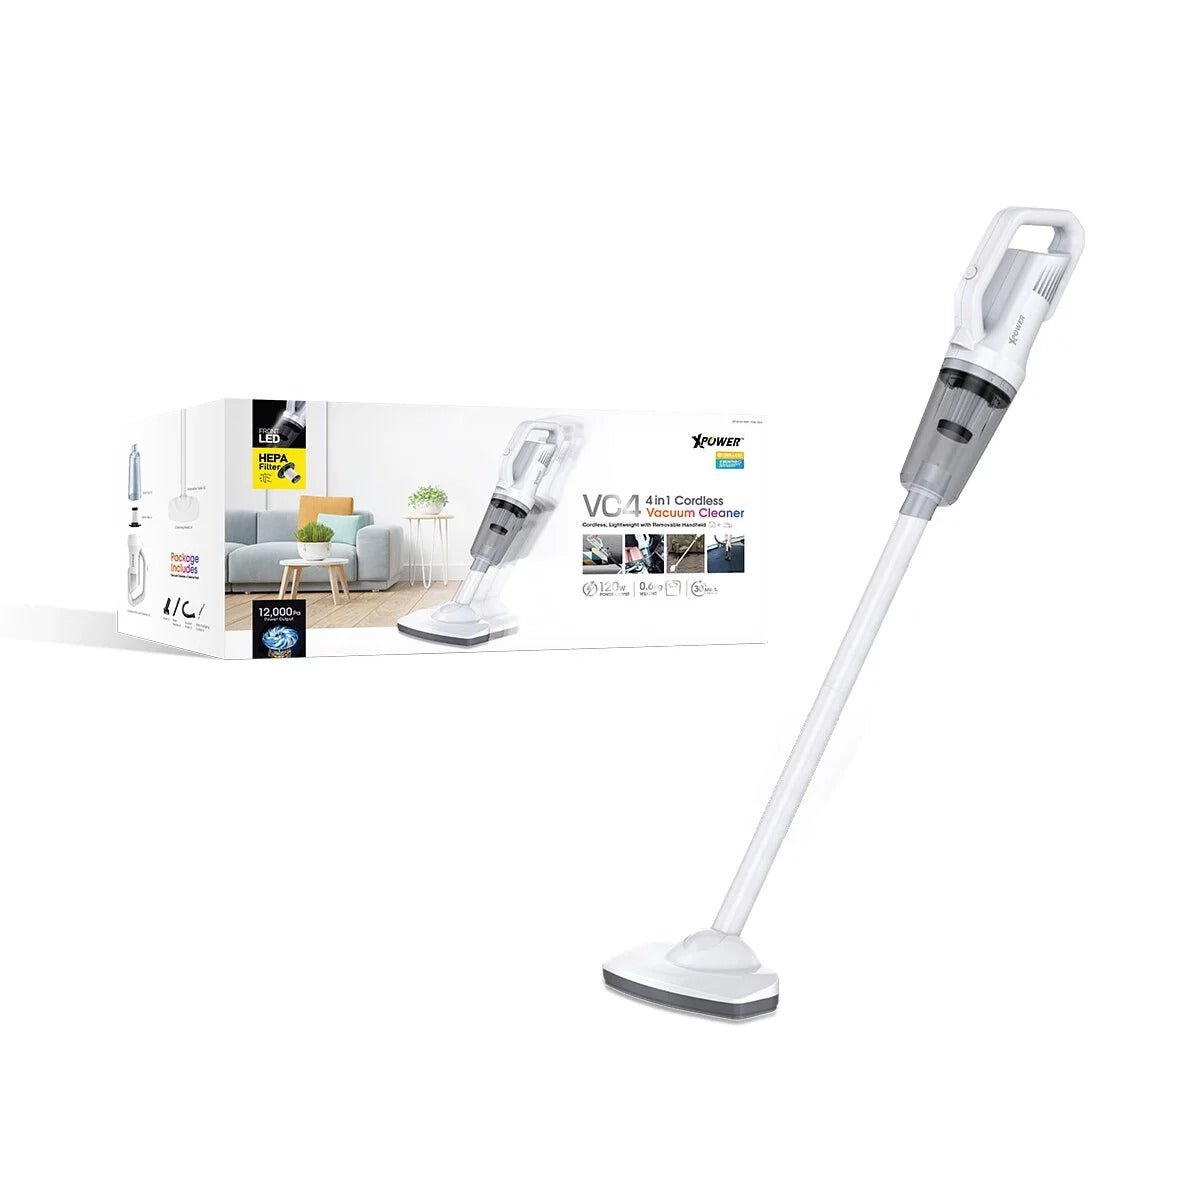 XPower VC4 4In1 Cordless Vacuum Cleaner 6000mAh Battery - White